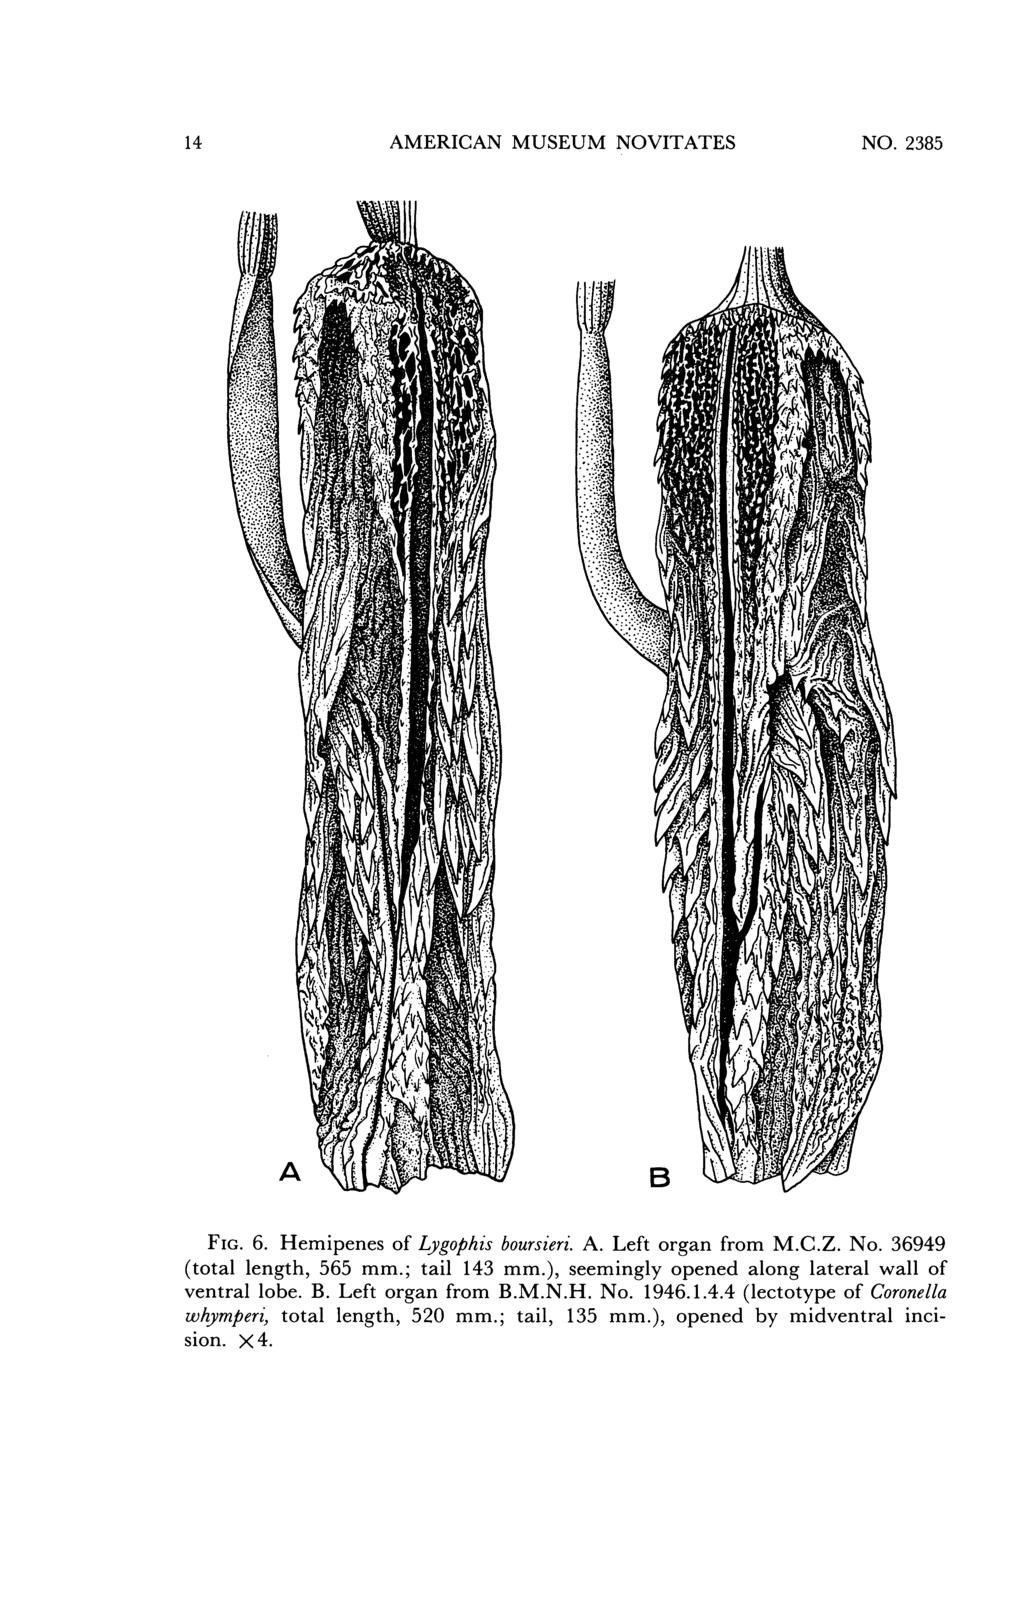 14 AMERICAN MUSEUM NOVITATES NO. 2385 FIG. 6. Hemipenes of Lygophis boursieri. A. Left organ from M.C.Z. No. 36949 (total length, 565 mm.; tail 143 mm.